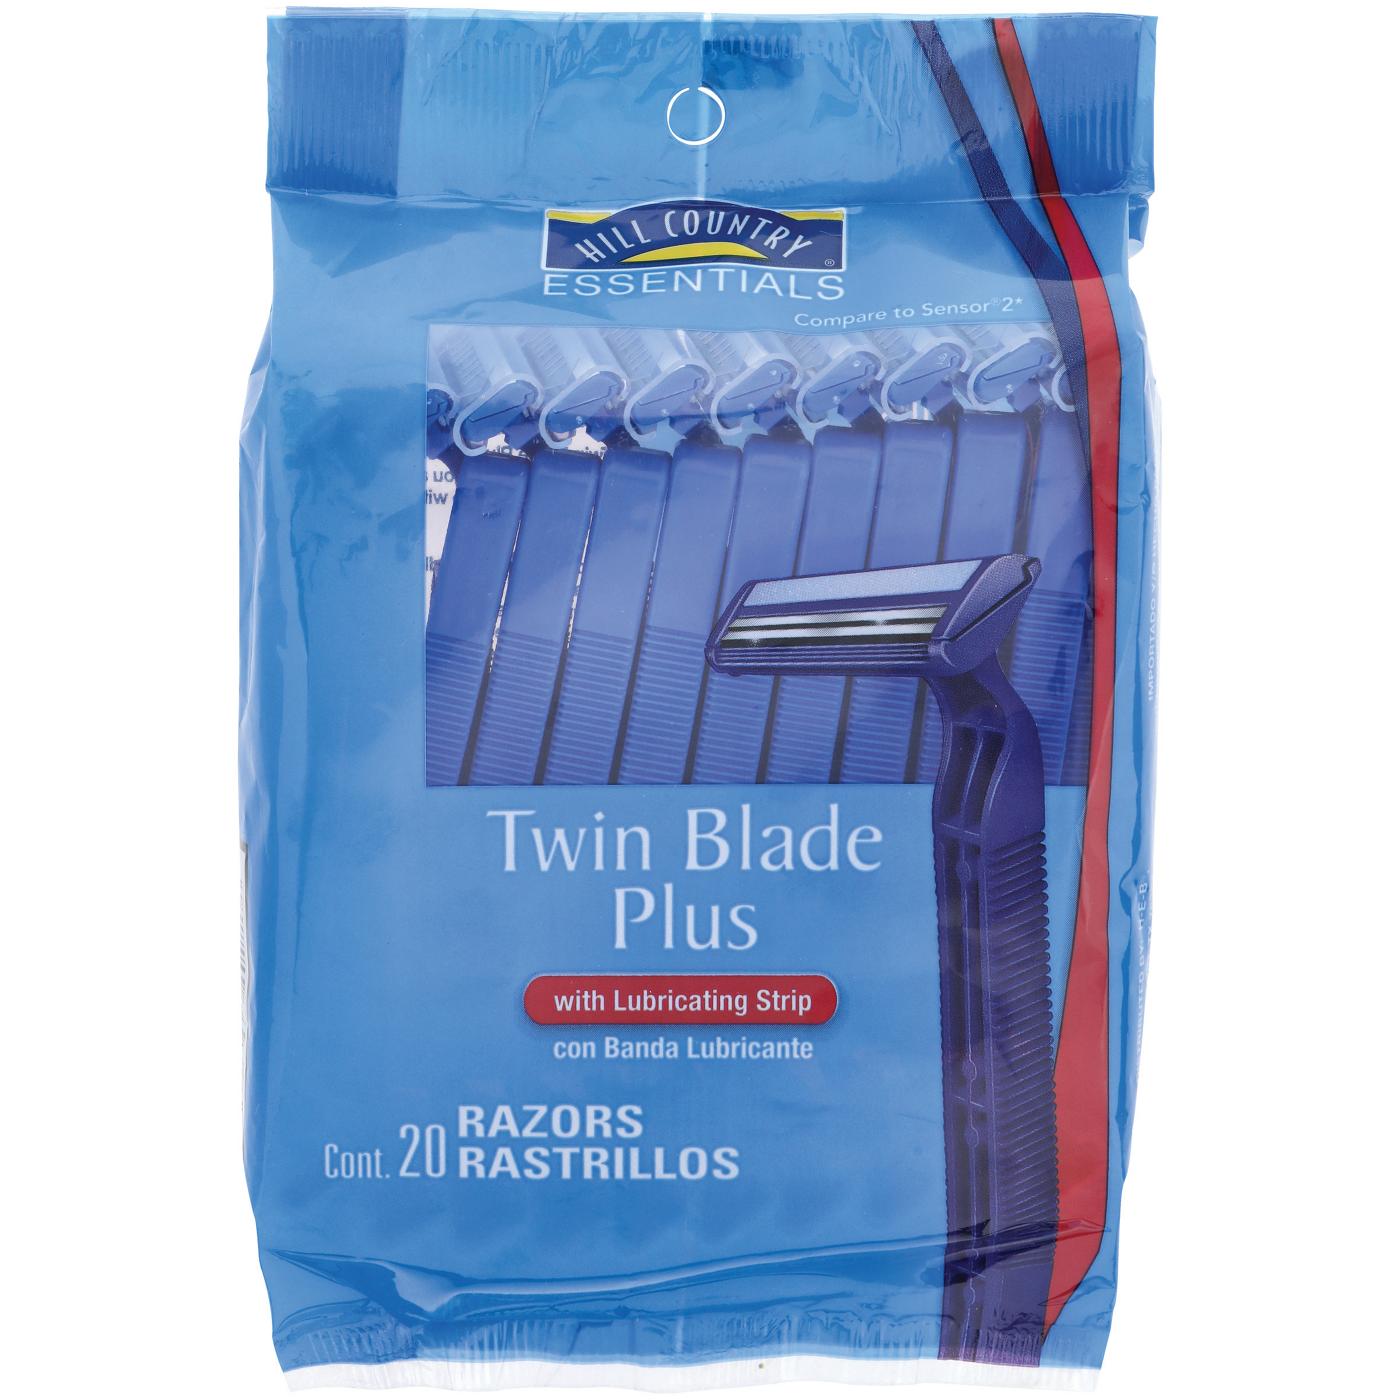 Hill Country Essentials Twin Blade Plus Disposable Razors - Blue; image 1 of 4